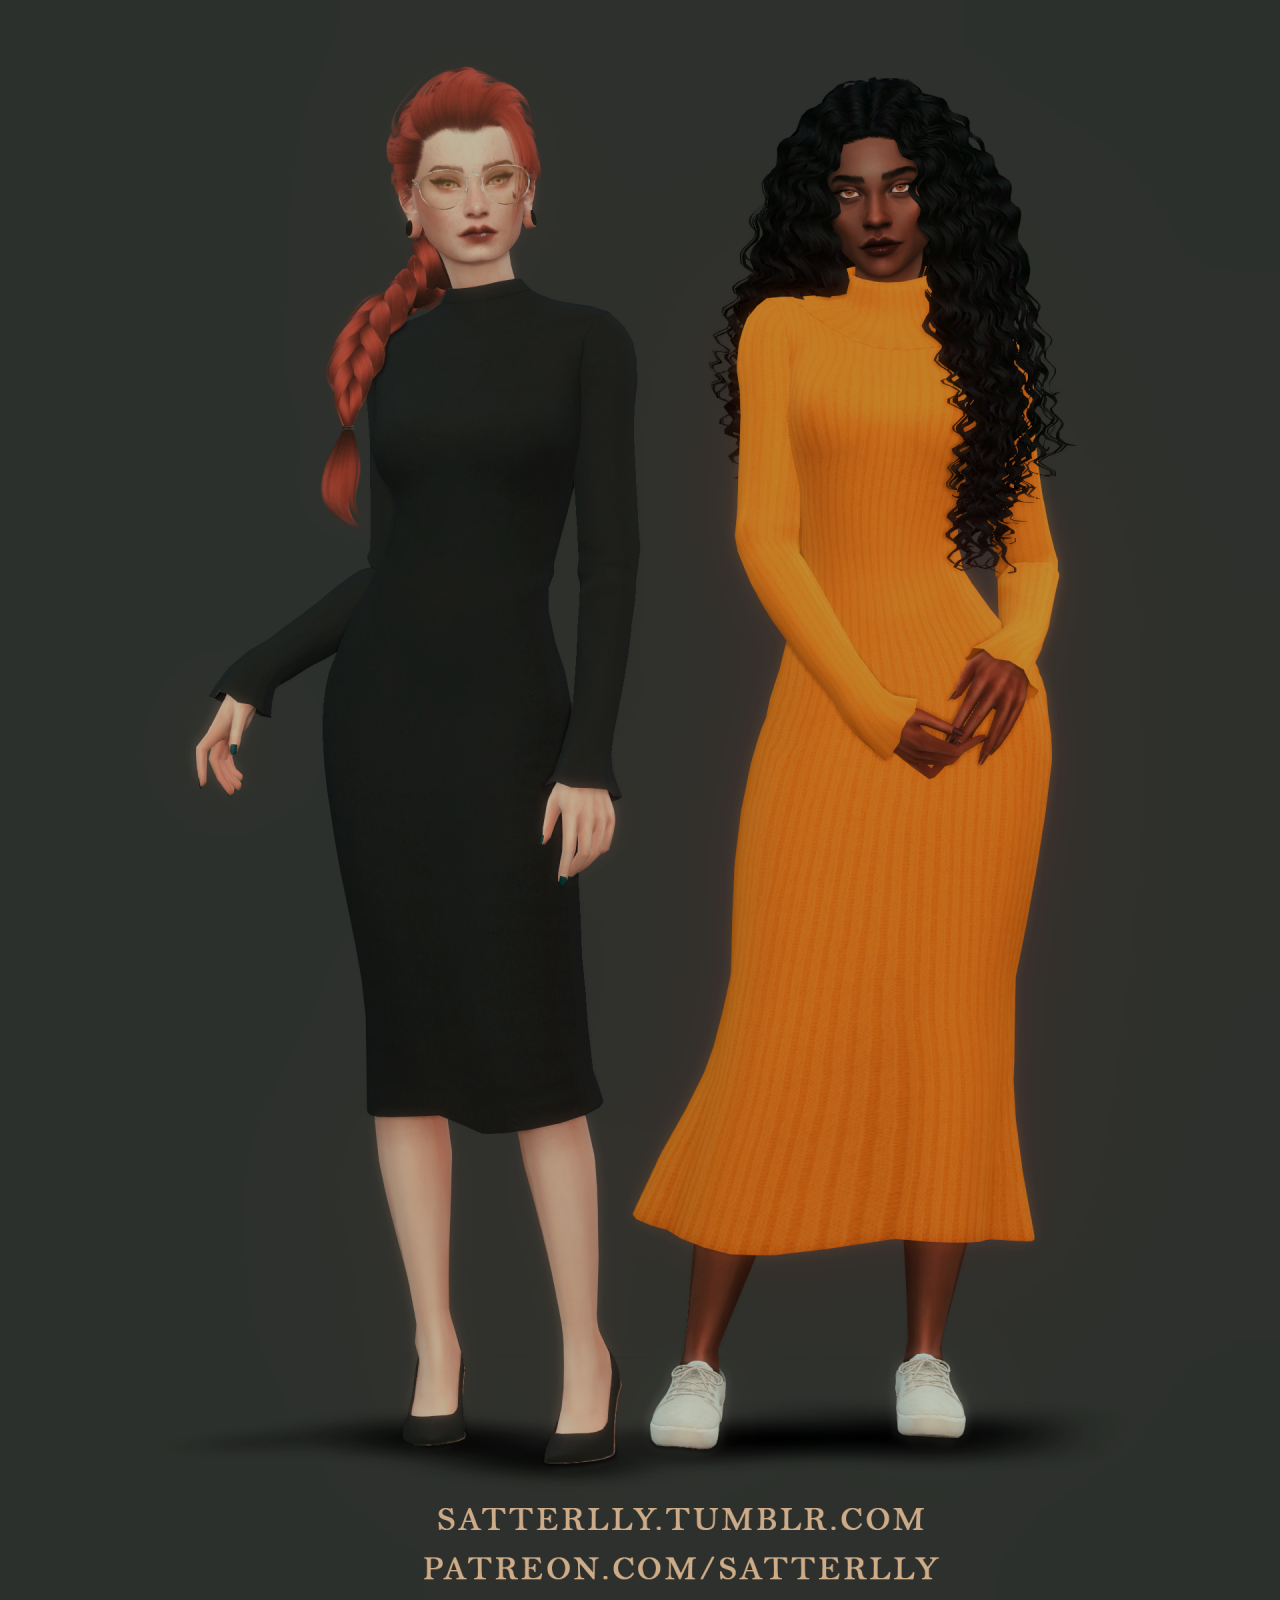 Modest Sims 4 Cc Finds